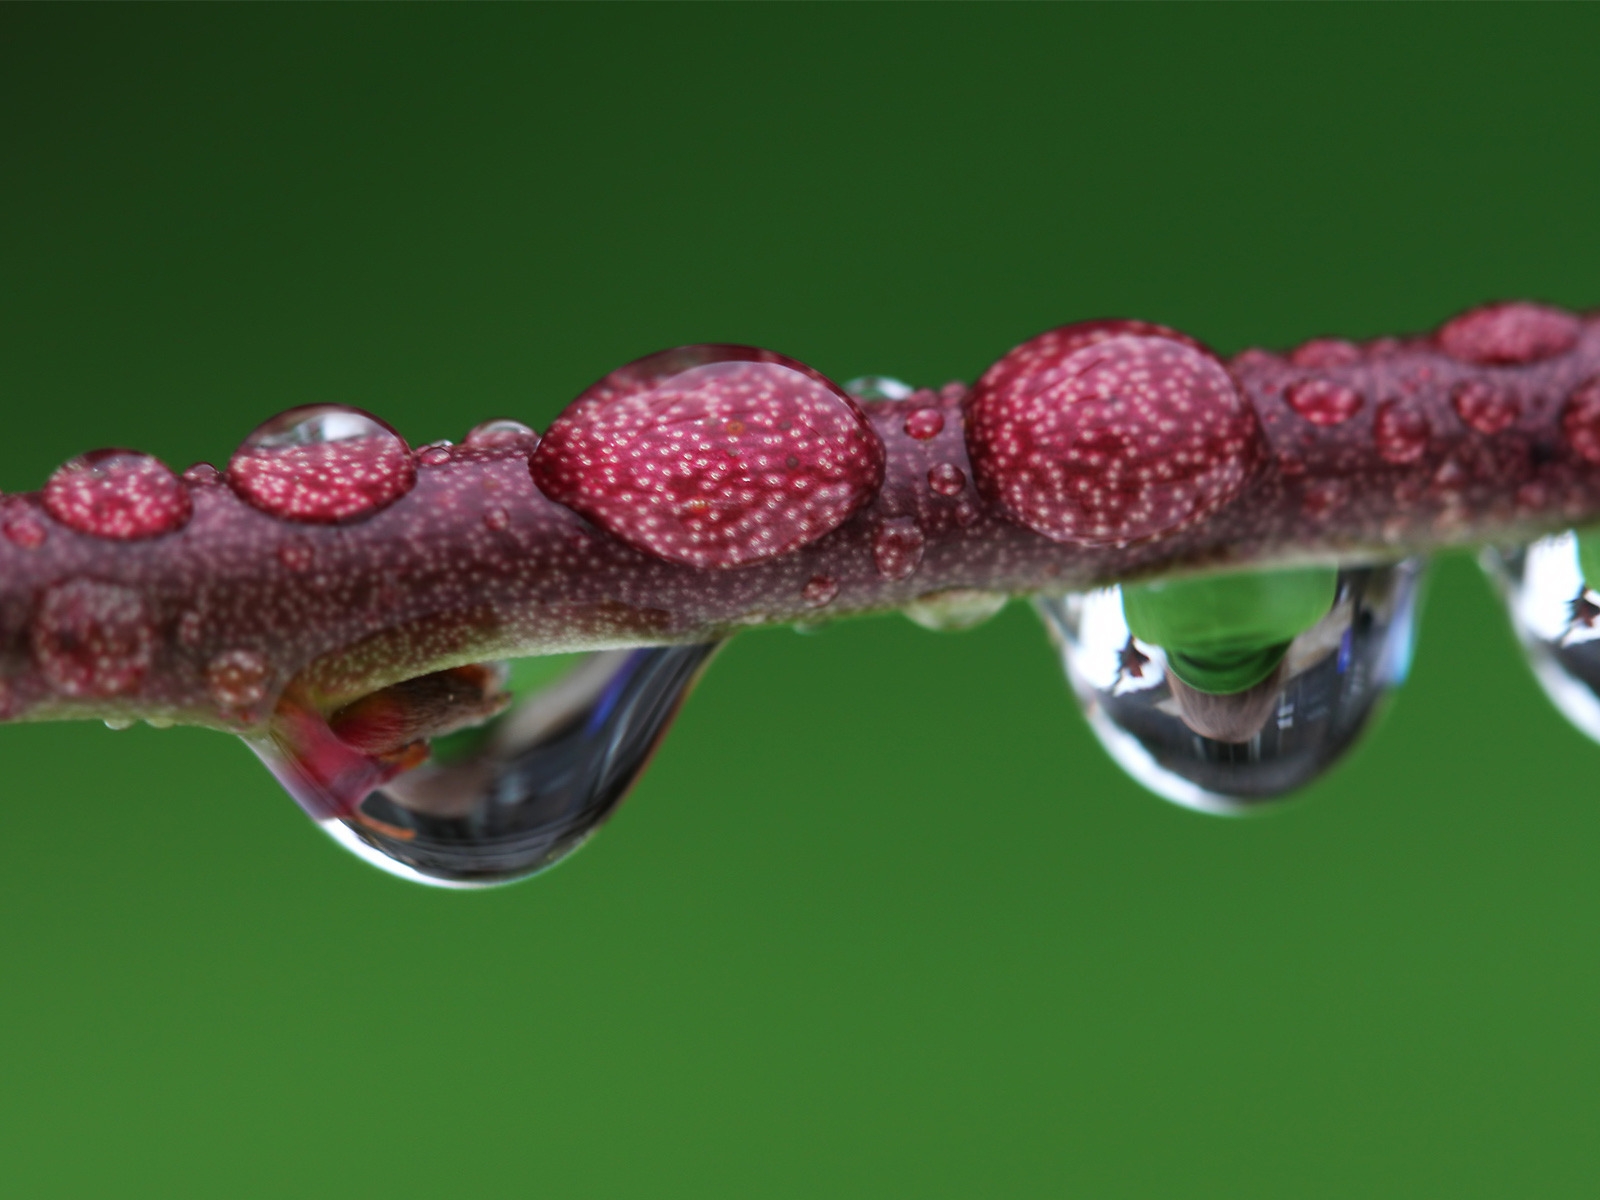 Droplet magnified branch for 1600 x 1200 resolution